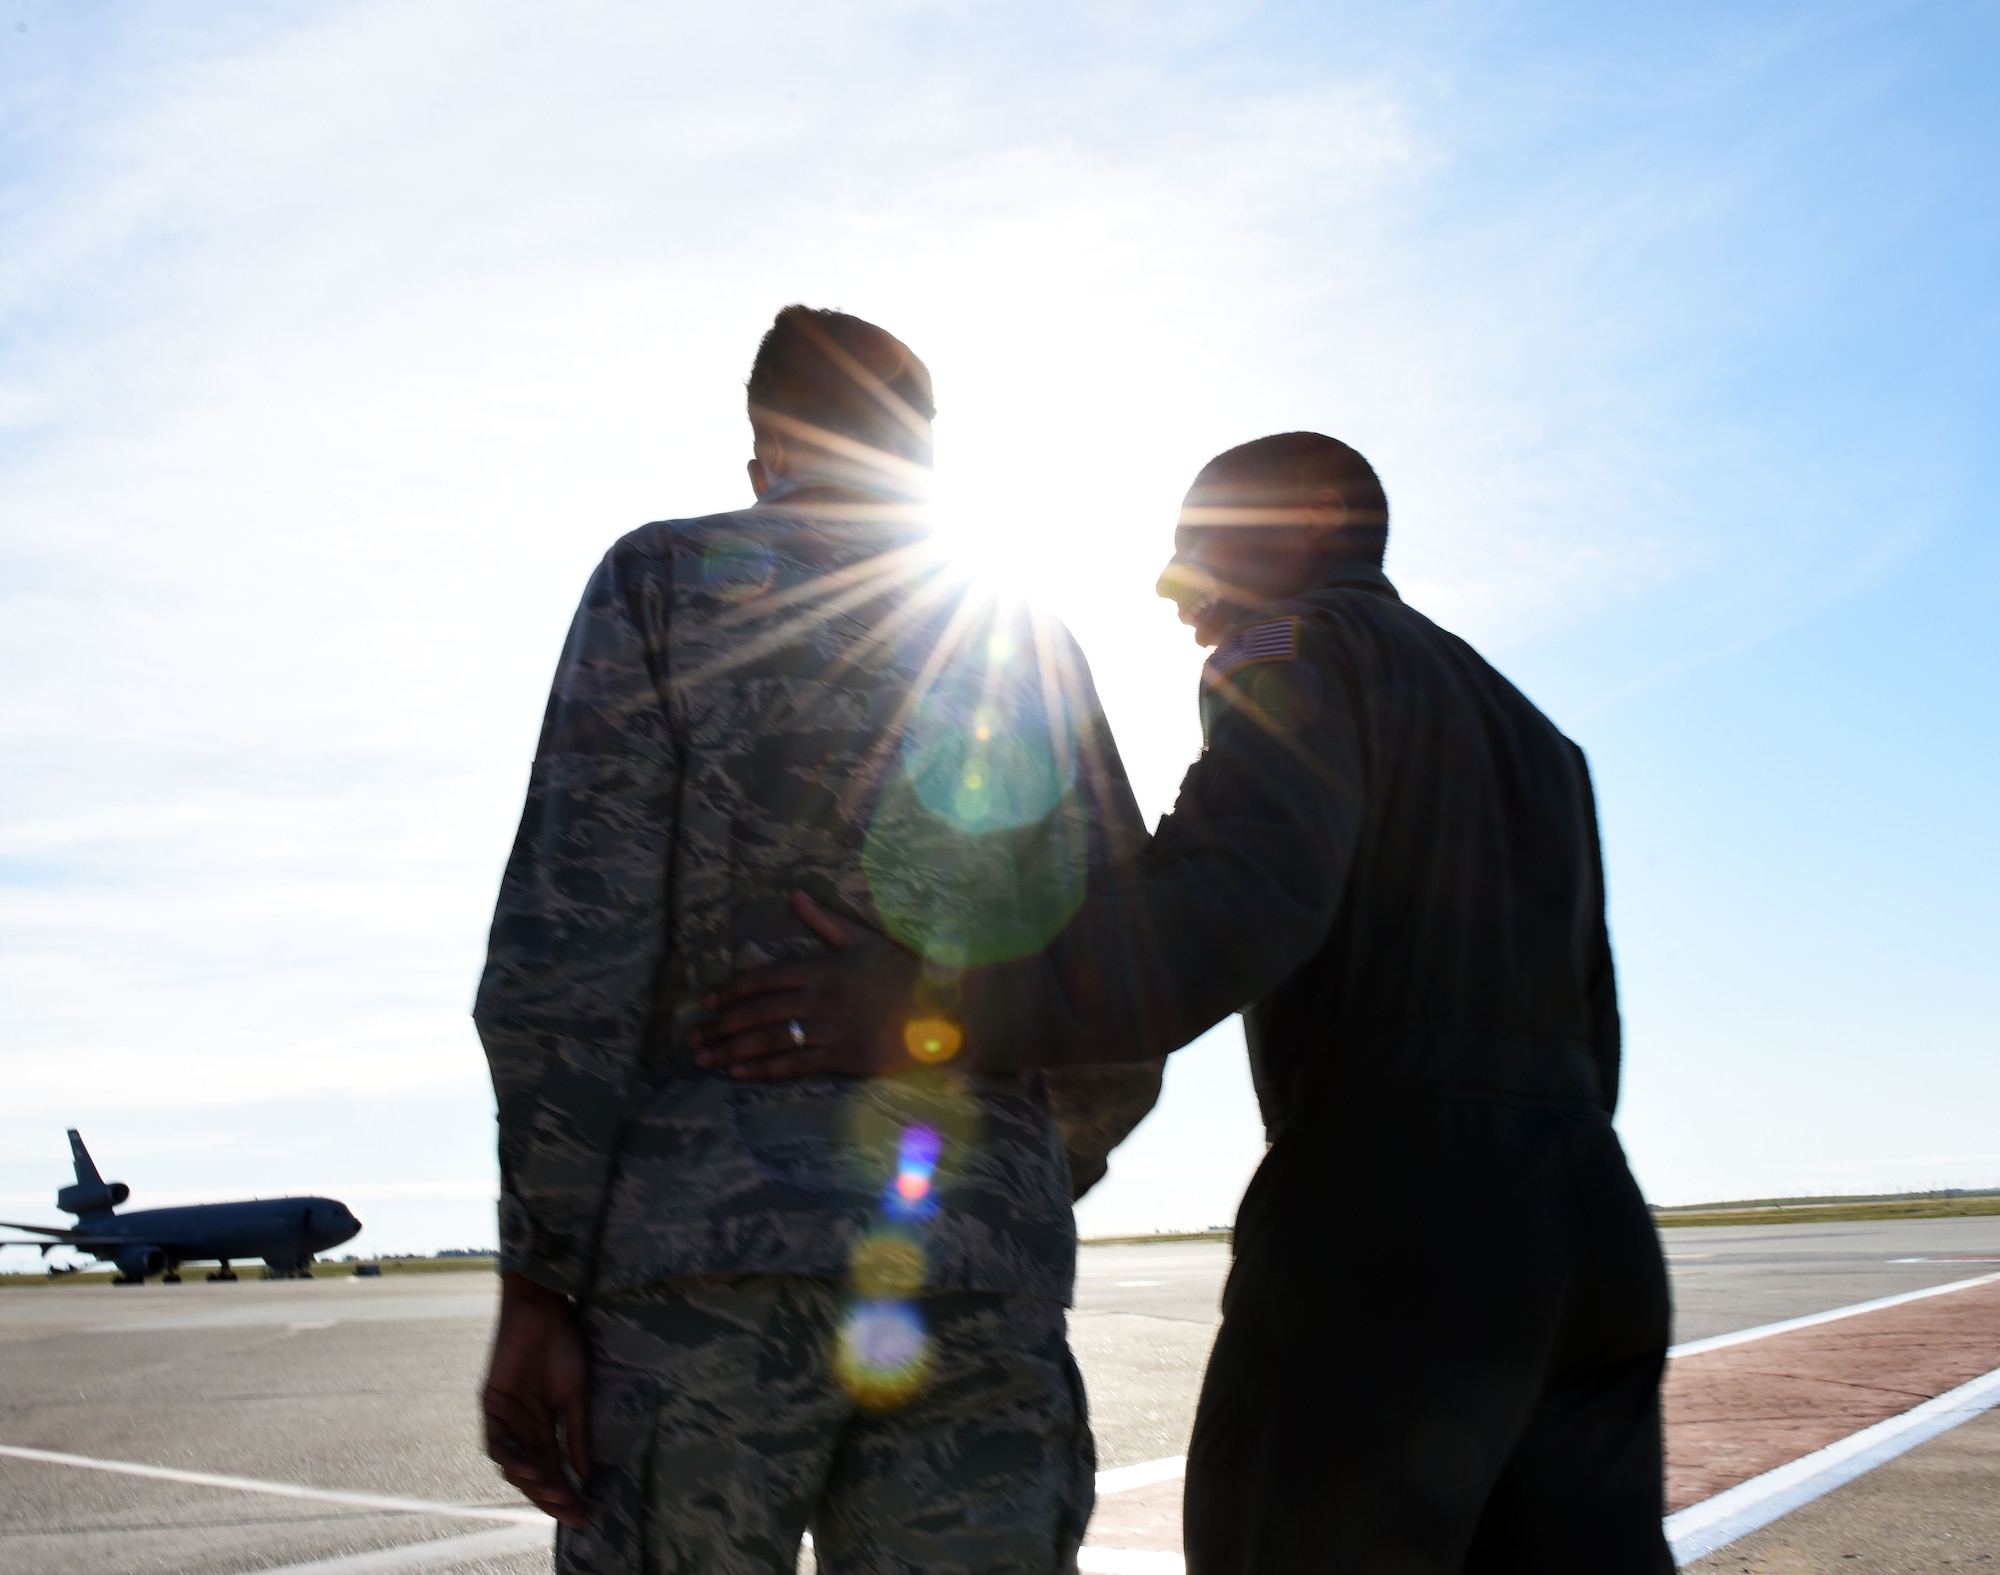 Capt. Aisha Lockett, 60th Air Mobility Wing executive officer, and Capt. Broderick Lockett, 21st Airlift Squadron director of staff, stand together on the flightline at Travis Air Force Base, California, Mar. 27. The Locketts have been at Travis since 2015 and, in that time, have contributed not only to the base's standard of living, but also to its history and legacy. (U.S. Air Force photo by Airman 1st Class Christian Conrad)